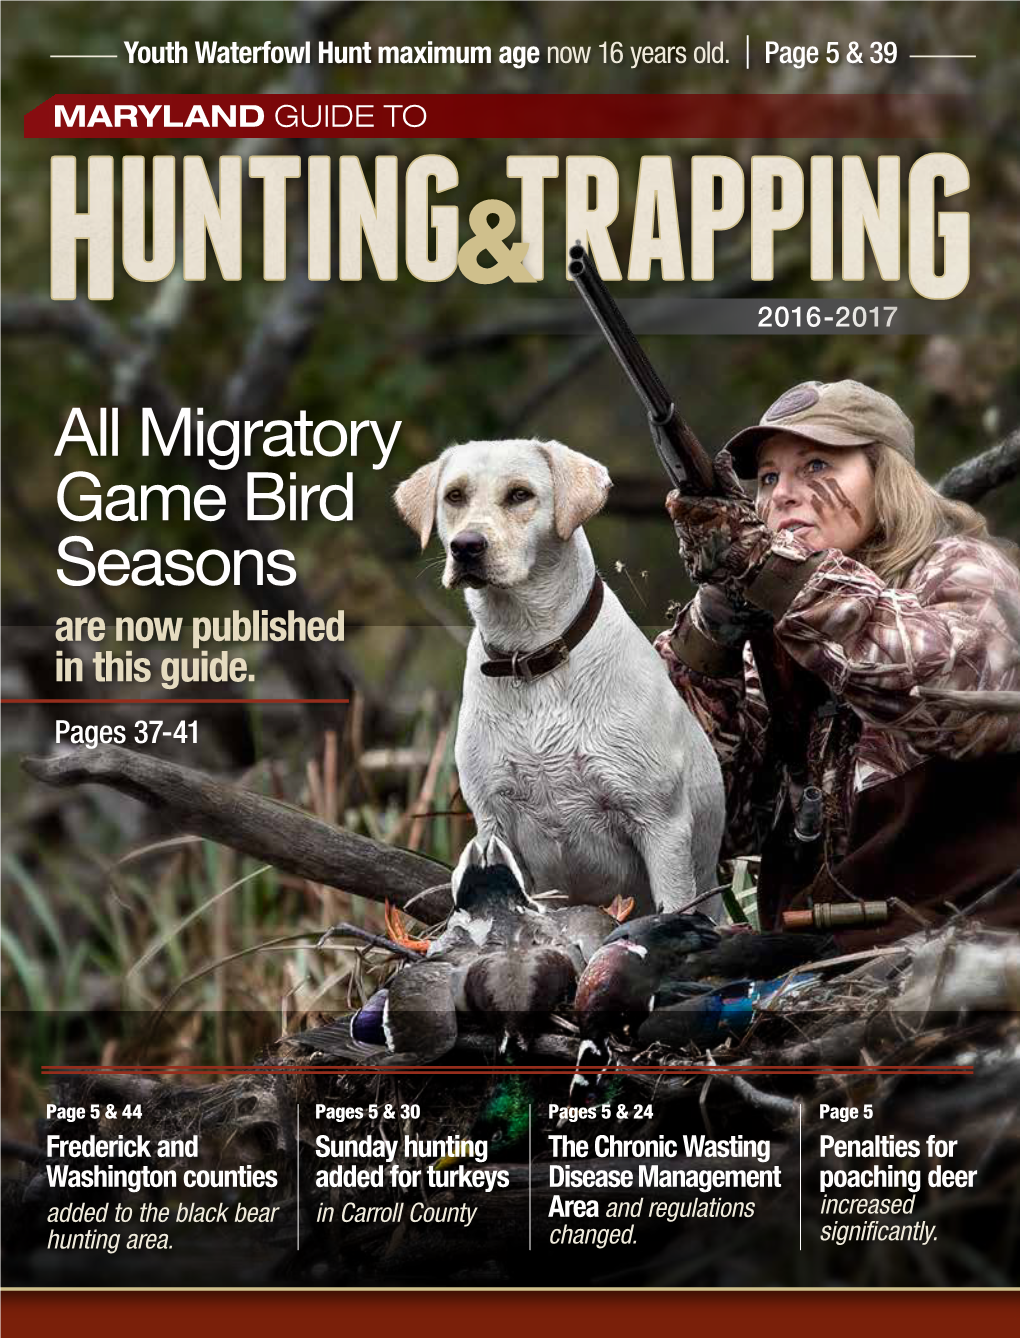 Migratory Game Bird Seasons Are Now Published in This Guide